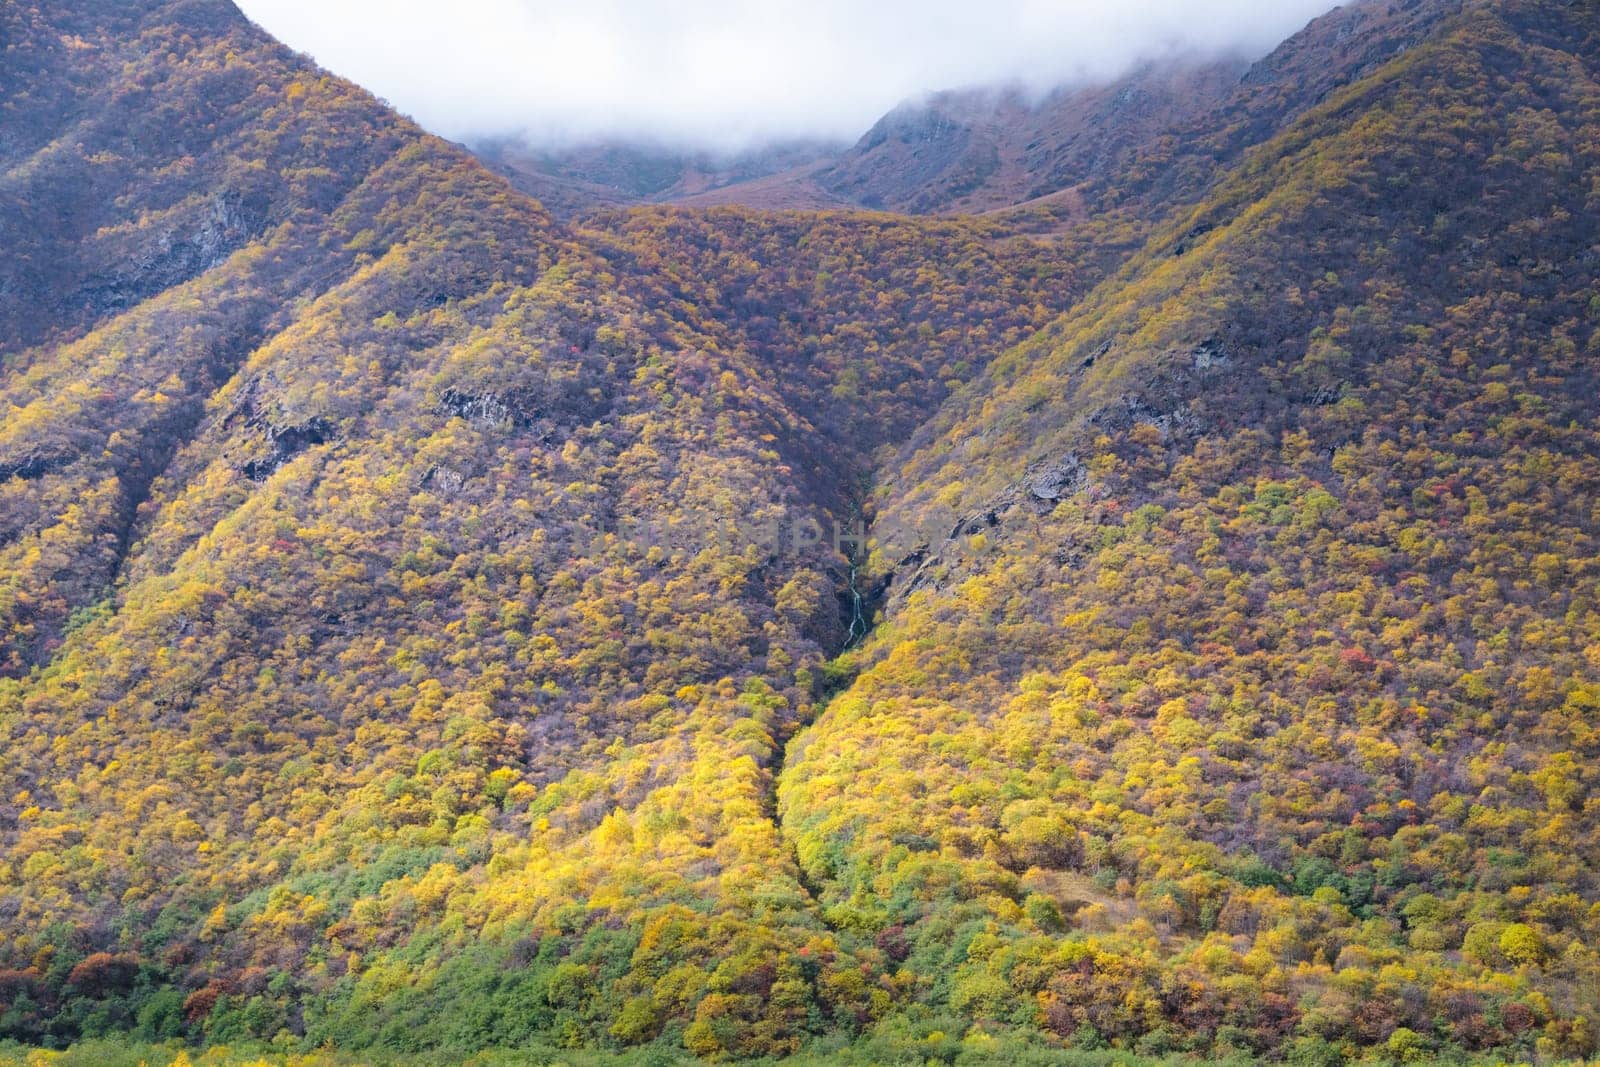 The picturesque autumn colors of the mountains reflect the grandeur and beauty of nature